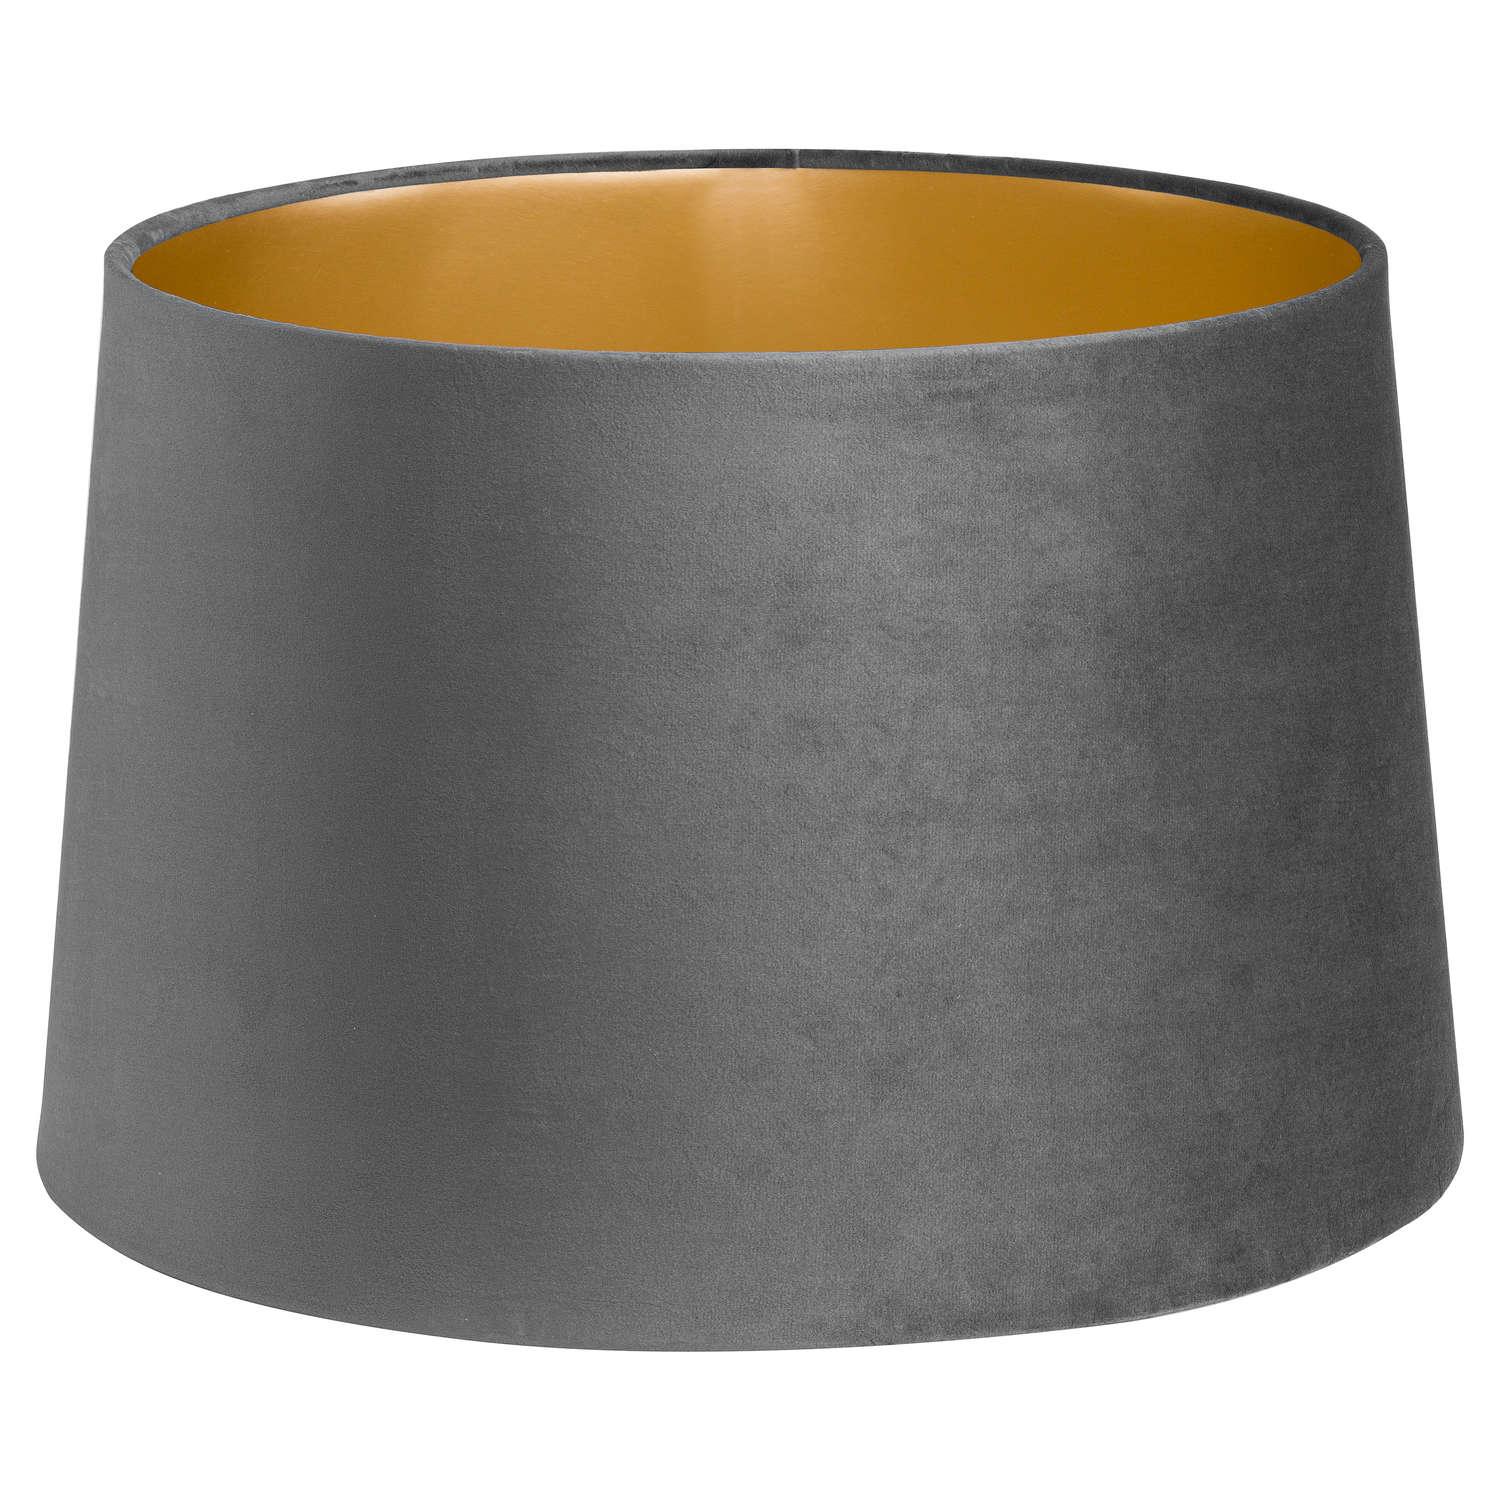 View Grey Velvet Lamp And Ceiling Shade information